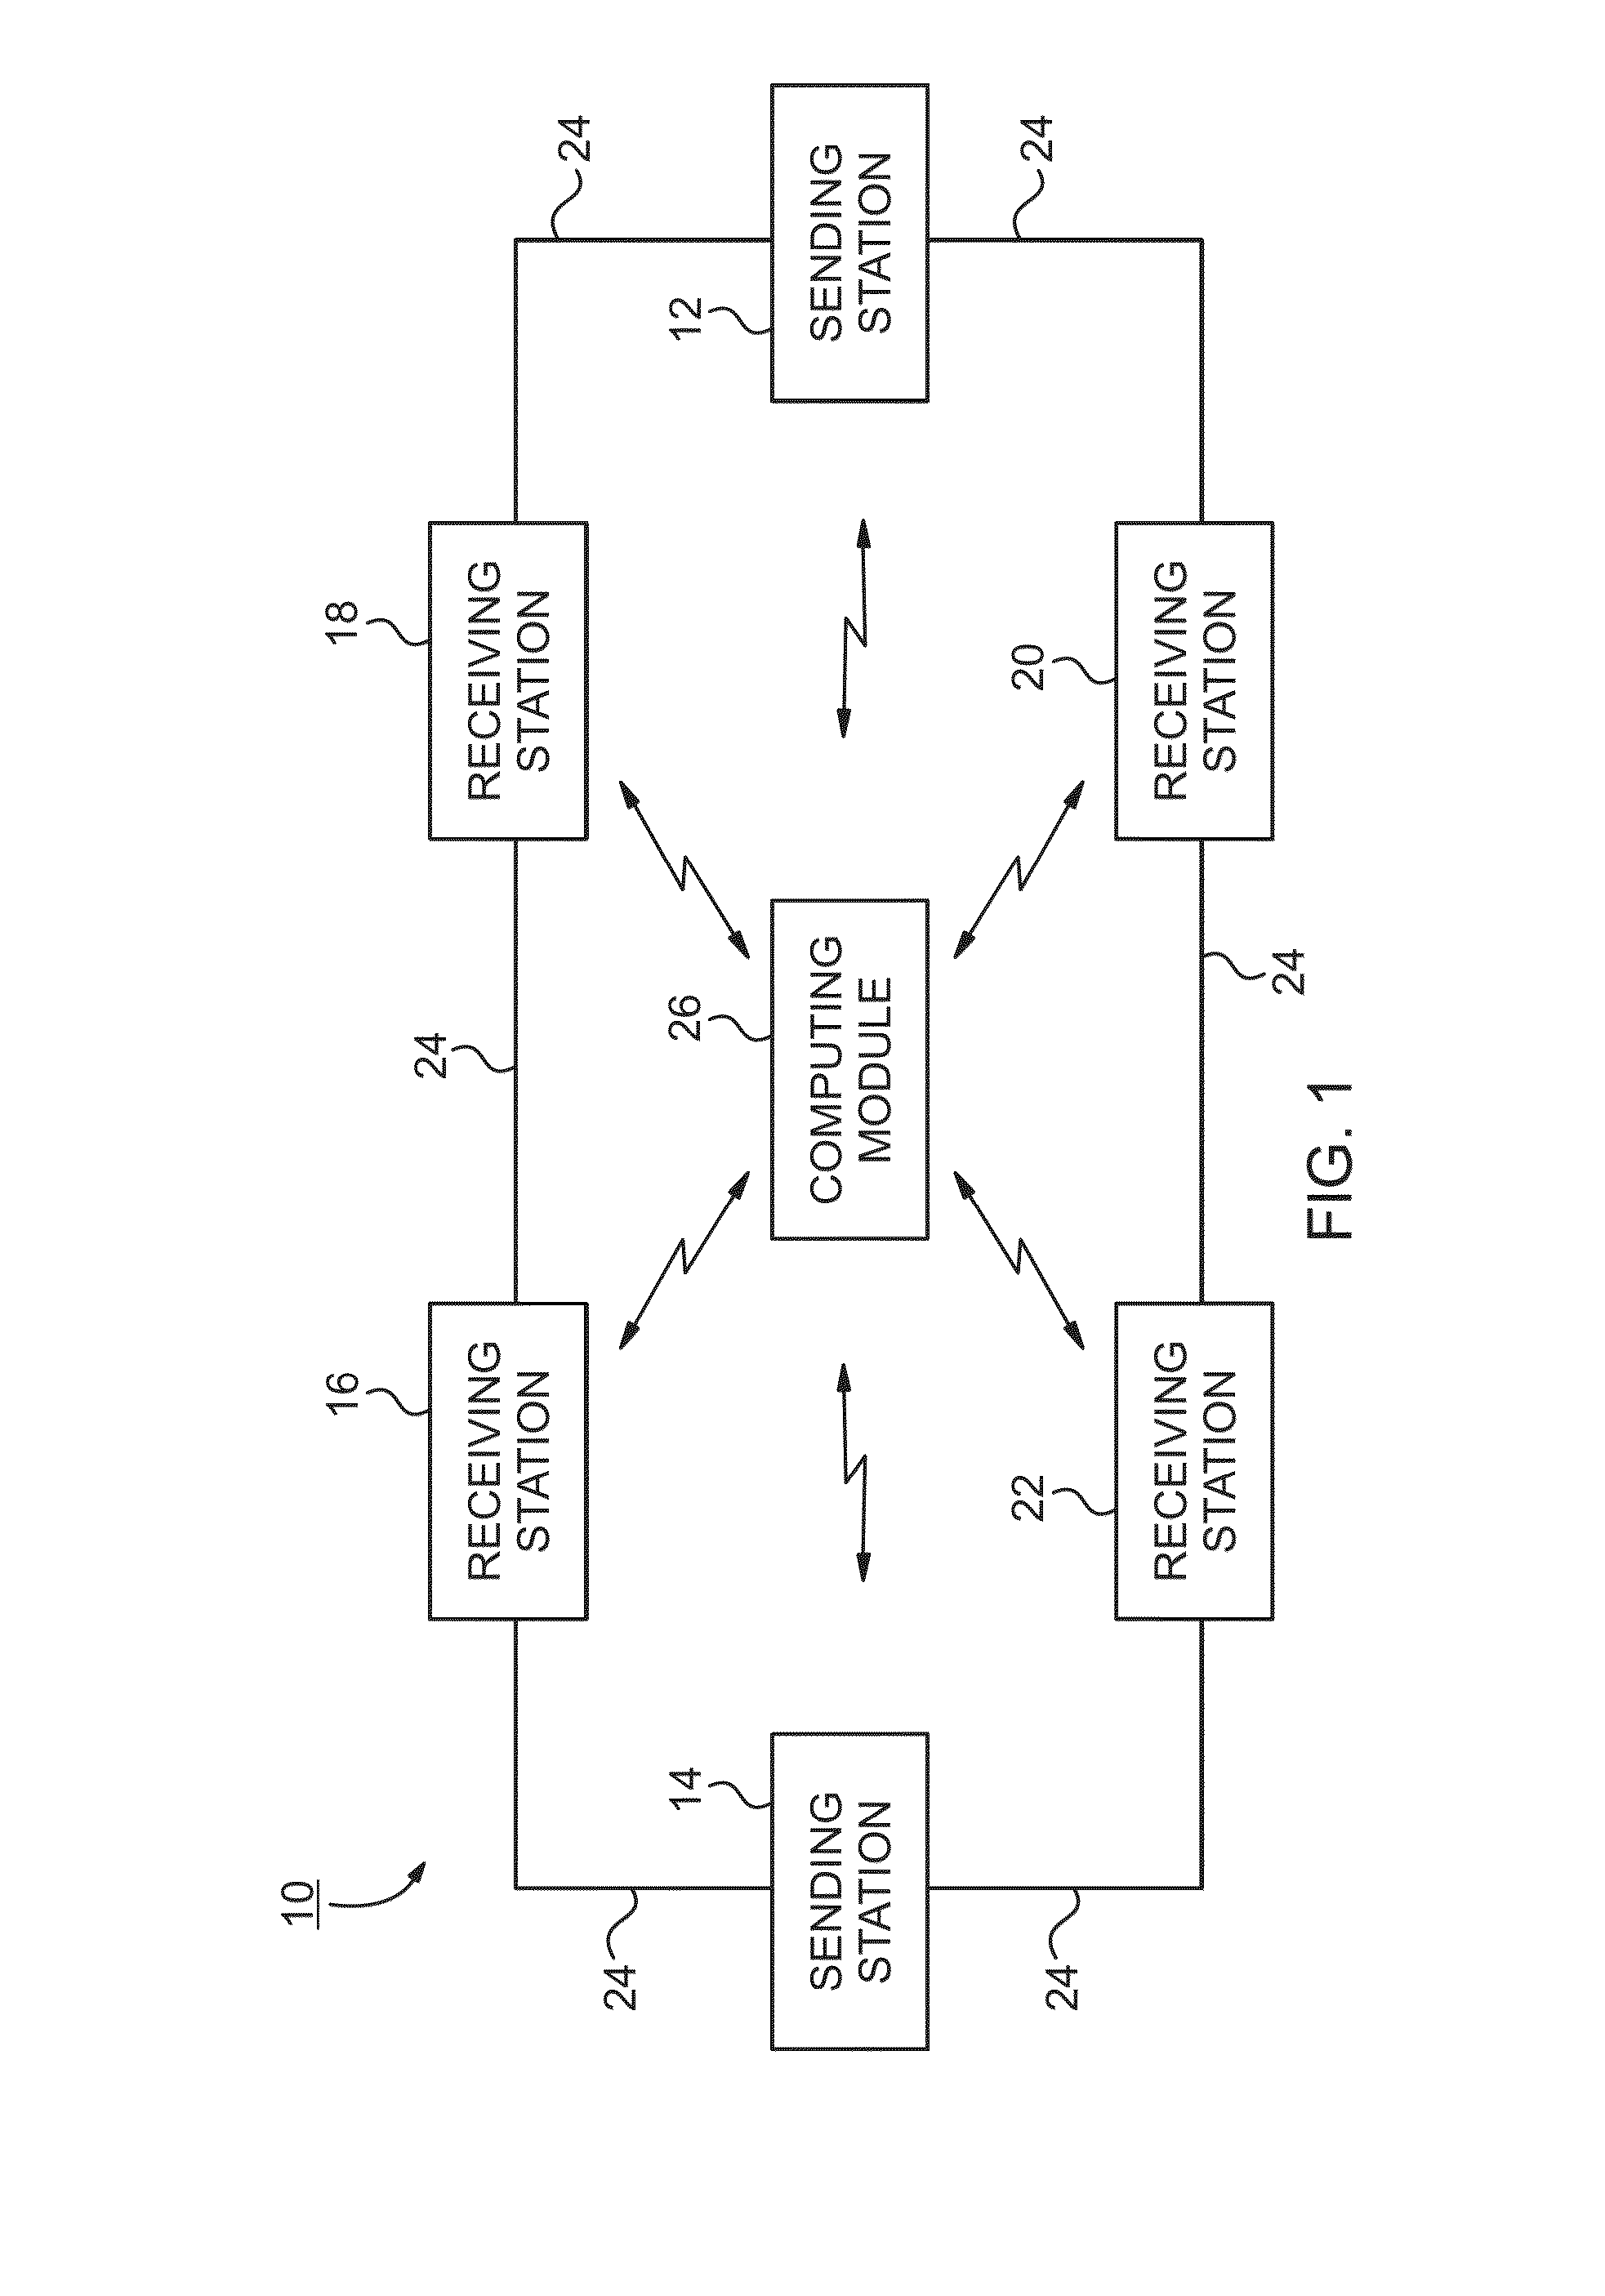 System and Method for Locking a Carrier/Container for Tracking, Controlling Access, and Providing Delivery Confirmation